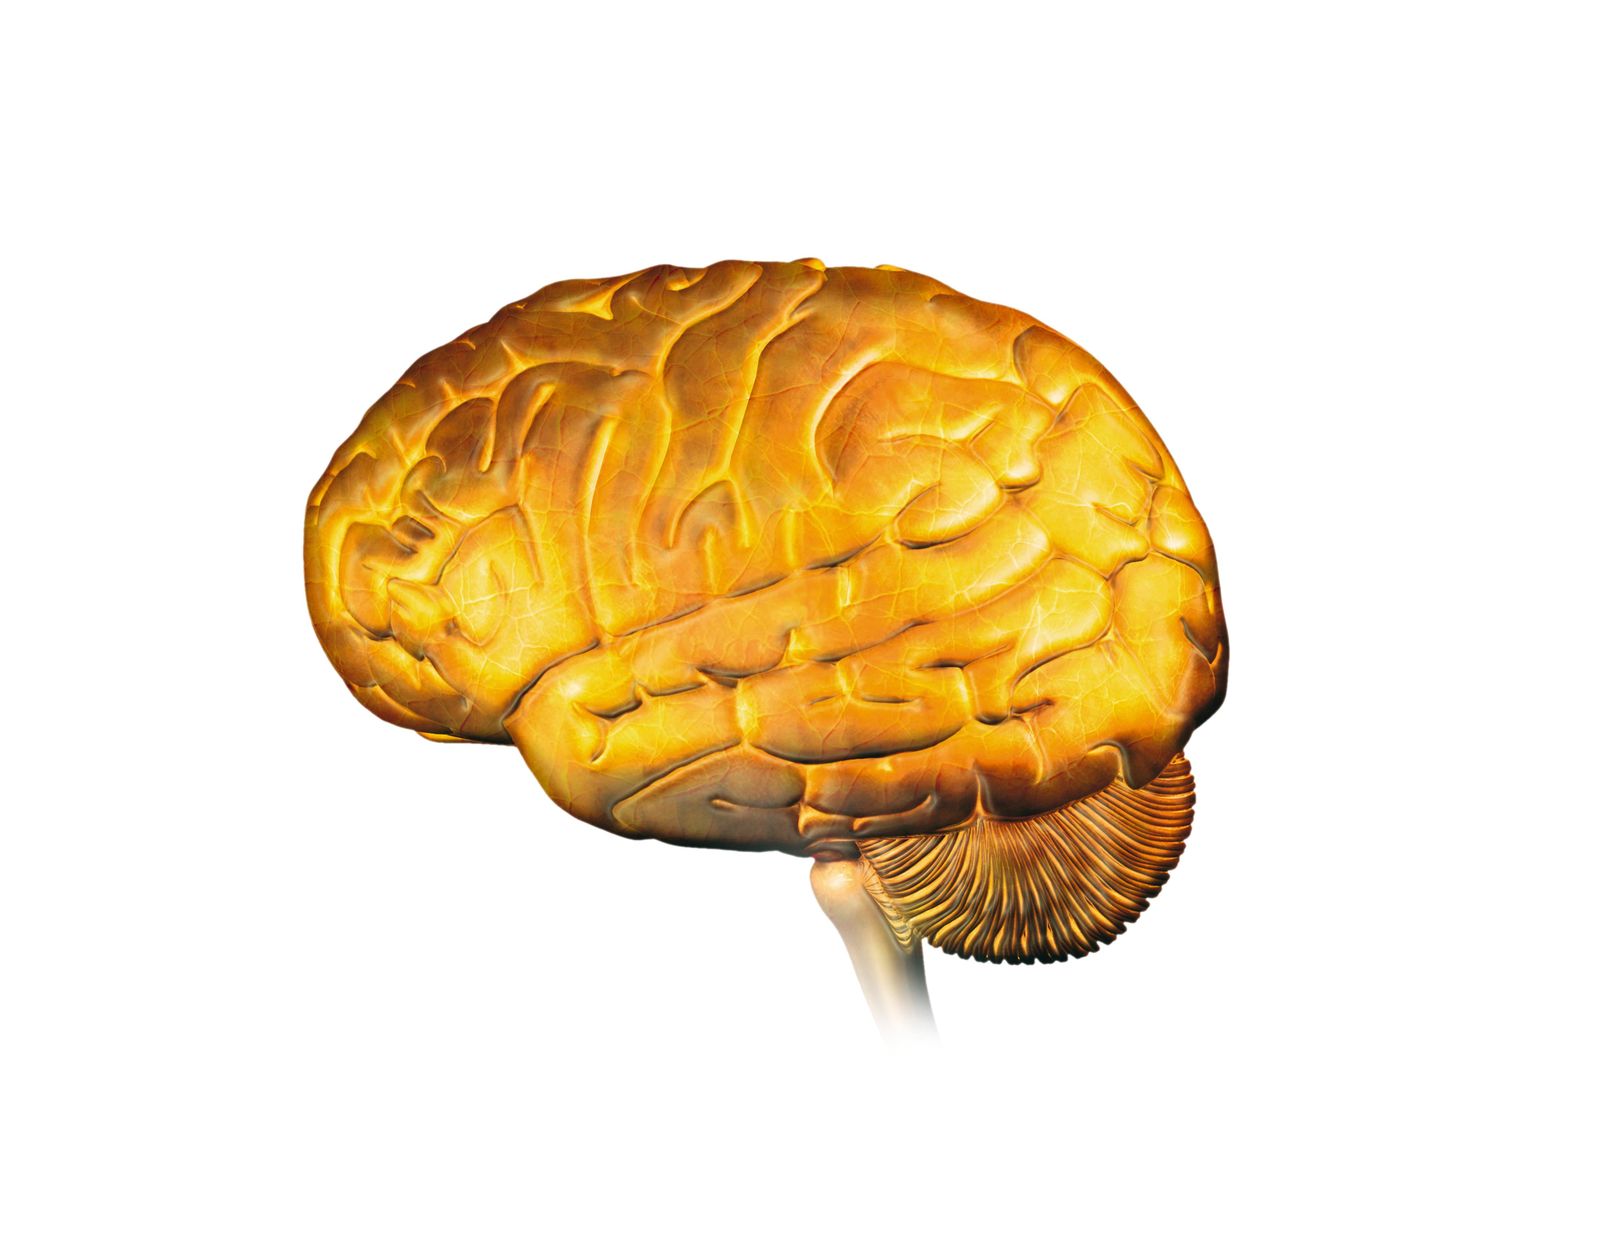 Gold Nanoparticles Can Remote Control the Brain, Smart News